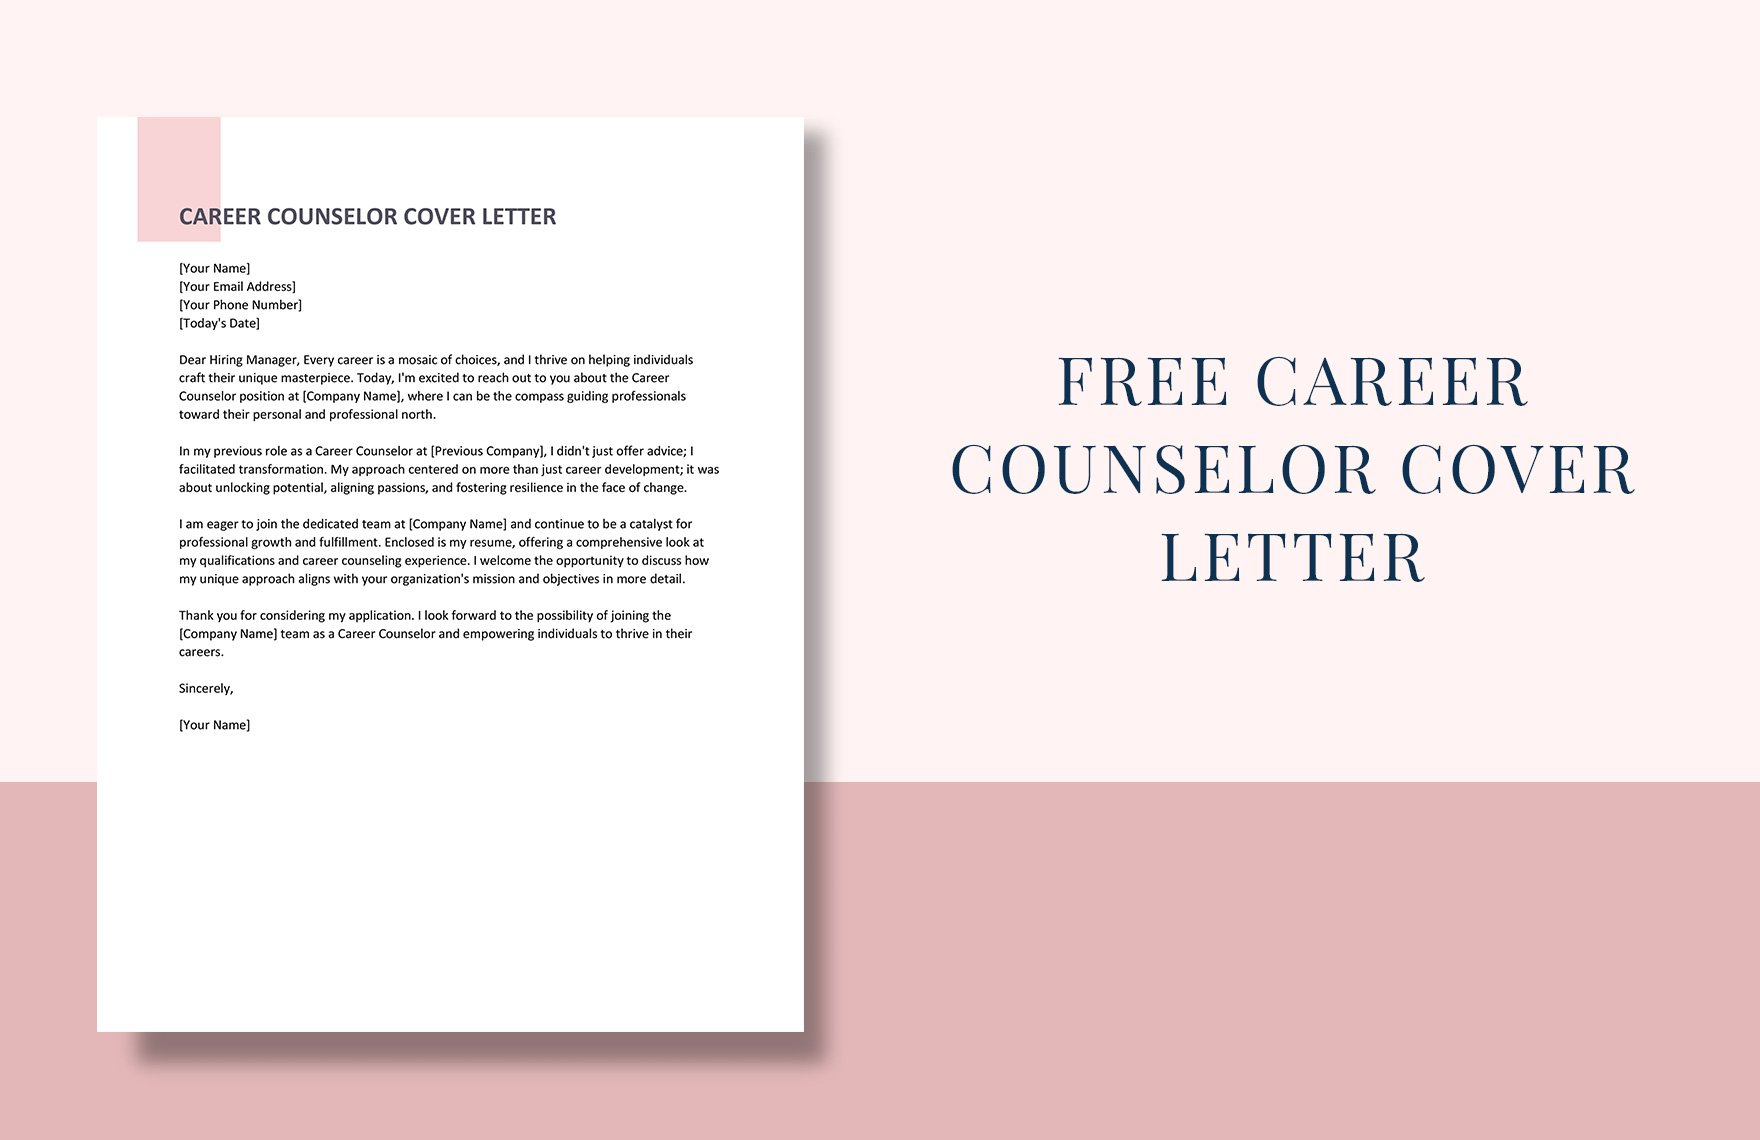 Career Counselor Cover Letter in Word, Google Docs